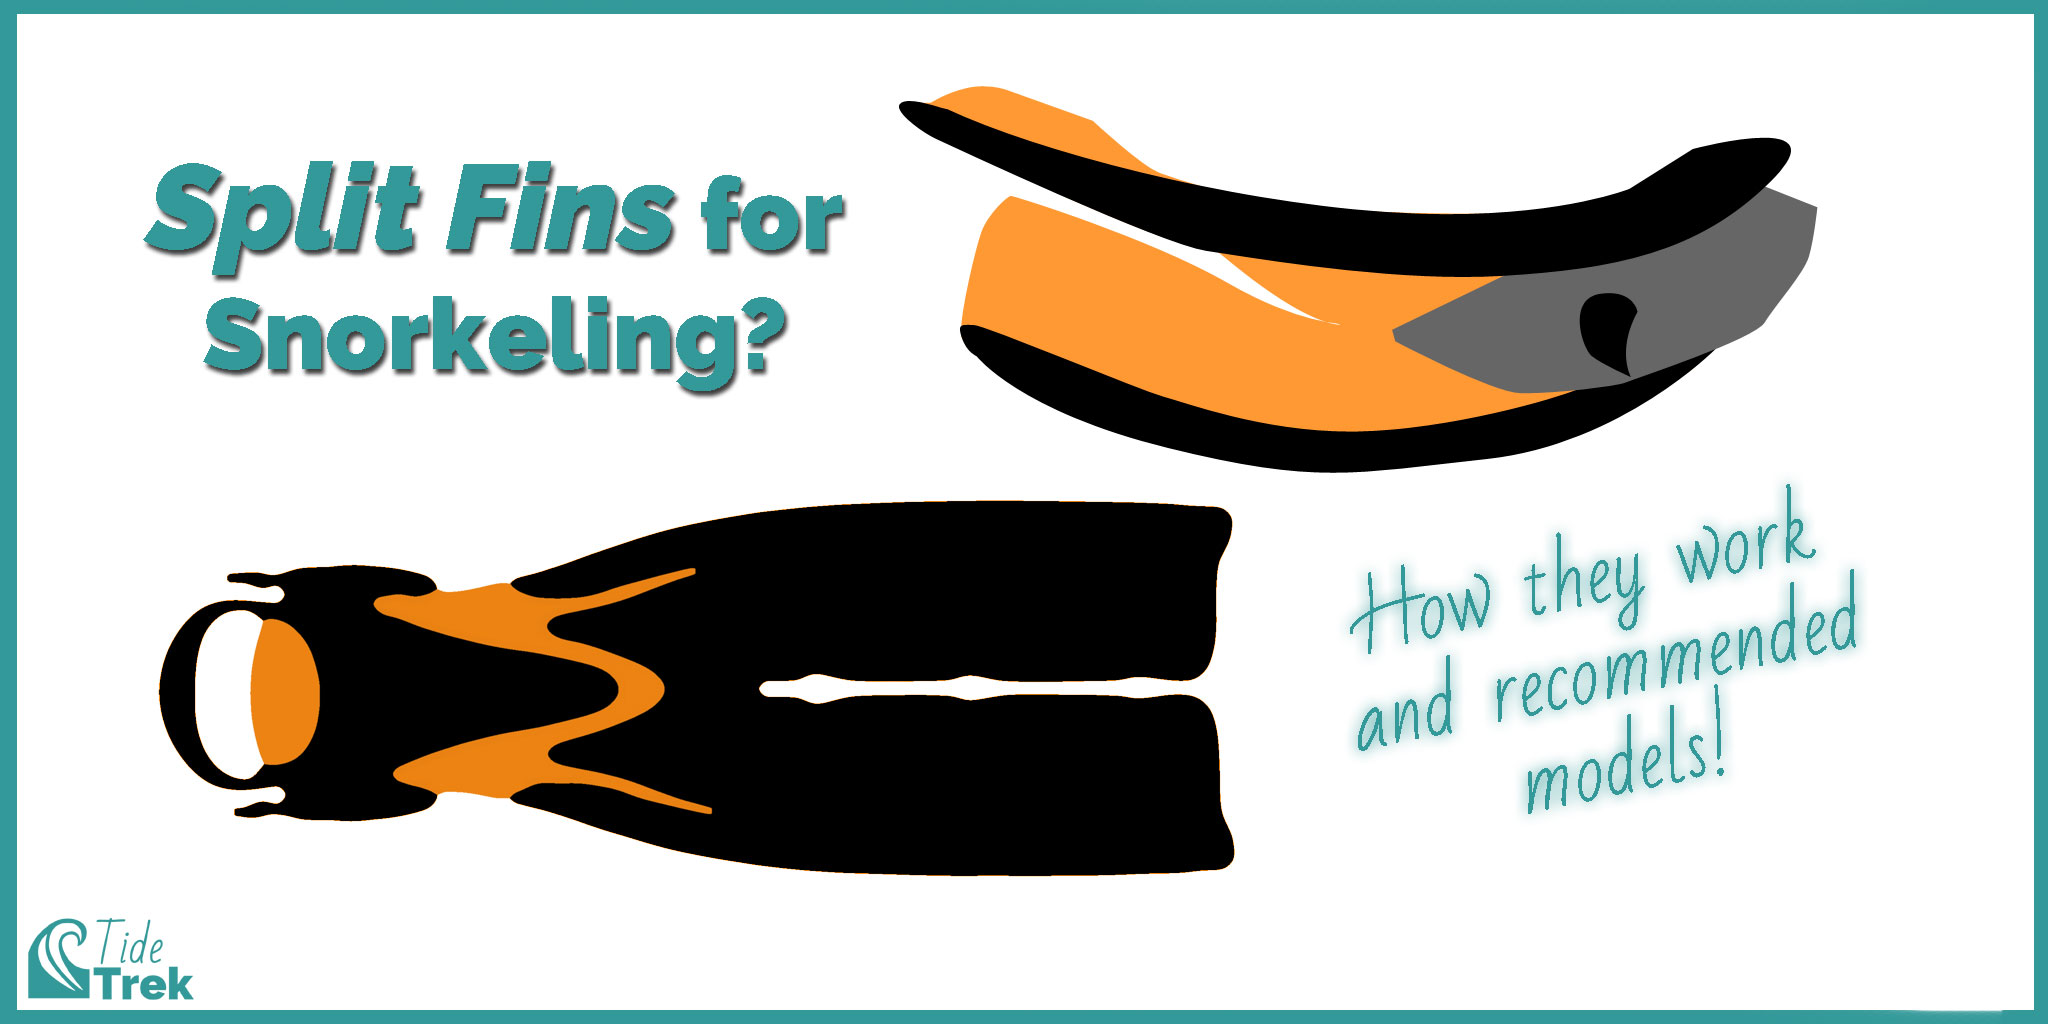 Split fins for snorkeling: How they work and recommended models